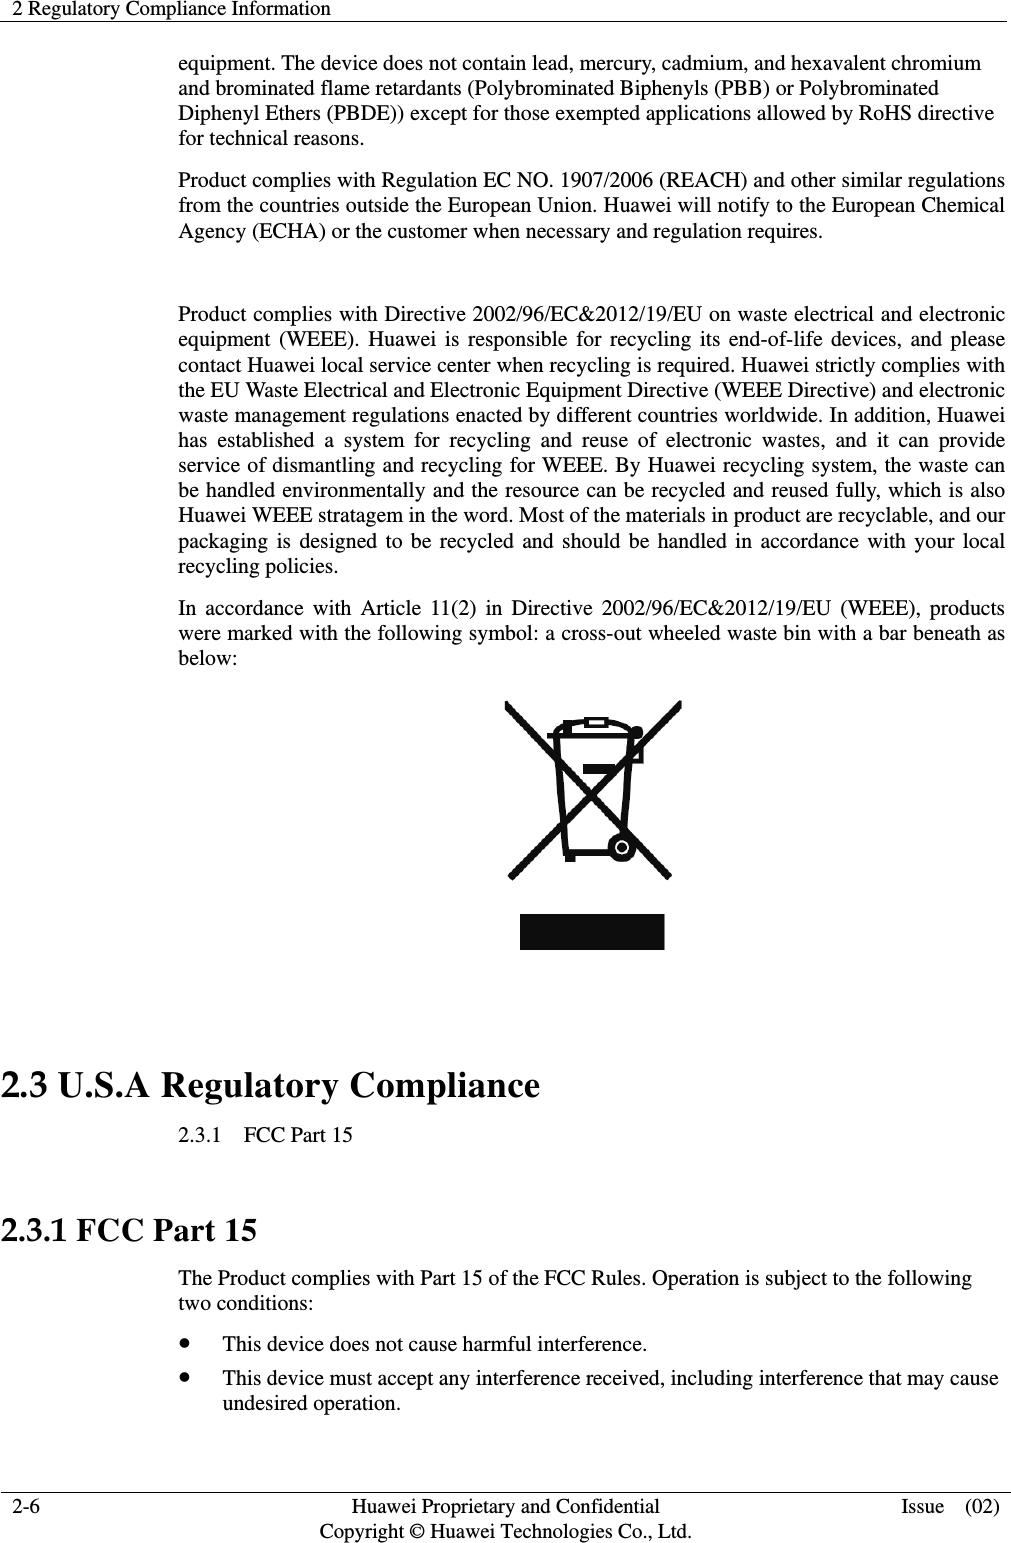 2 Regulatory Compliance Information   2-6  Huawei Proprietary and Confidential         Copyright © Huawei Technologies Co., Ltd. Issue  (02) equipment. The device does not contain lead, mercury, cadmium, and hexavalent chromium and brominated flame retardants (Polybrominated Biphenyls (PBB) or Polybrominated Diphenyl Ethers (PBDE)) except for those exempted applications allowed by RoHS directive for technical reasons.   Product complies with Regulation EC NO. 1907/2006 (REACH) and other similar regulations from the countries outside the European Union. Huawei will notify to the European Chemical Agency (ECHA) or the customer when necessary and regulation requires.  Product complies with Directive 2002/96/EC&amp;2012/19/EU on waste electrical and electronic equipment (WEEE). Huawei is responsible for recycling its end-of-life devices, and please contact Huawei local service center when recycling is required. Huawei strictly complies with the EU Waste Electrical and Electronic Equipment Directive (WEEE Directive) and electronic waste management regulations enacted by different countries worldwide. In addition, Huawei has established a system for recycling and reuse of electronic wastes, and it can provide service of dismantling and recycling for WEEE. By Huawei recycling system, the waste can be handled environmentally and the resource can be recycled and reused fully, which is also Huawei WEEE stratagem in the word. Most of the materials in product are recyclable, and our packaging is designed to be recycled and should be handled in accordance with your local recycling policies.   In accordance with Article 11(2) in Directive 2002/96/EC&amp;2012/19/EU (WEEE), products were marked with the following symbol: a cross-out wheeled waste bin with a bar beneath as below:   2.3 U.S.A Regulatory Compliance 2.3.1  FCC Part 15  2.3.1 FCC Part 15 The Product complies with Part 15 of the FCC Rules. Operation is subject to the following two conditions: z This device does not cause harmful interference. z This device must accept any interference received, including interference that may cause undesired operation. 